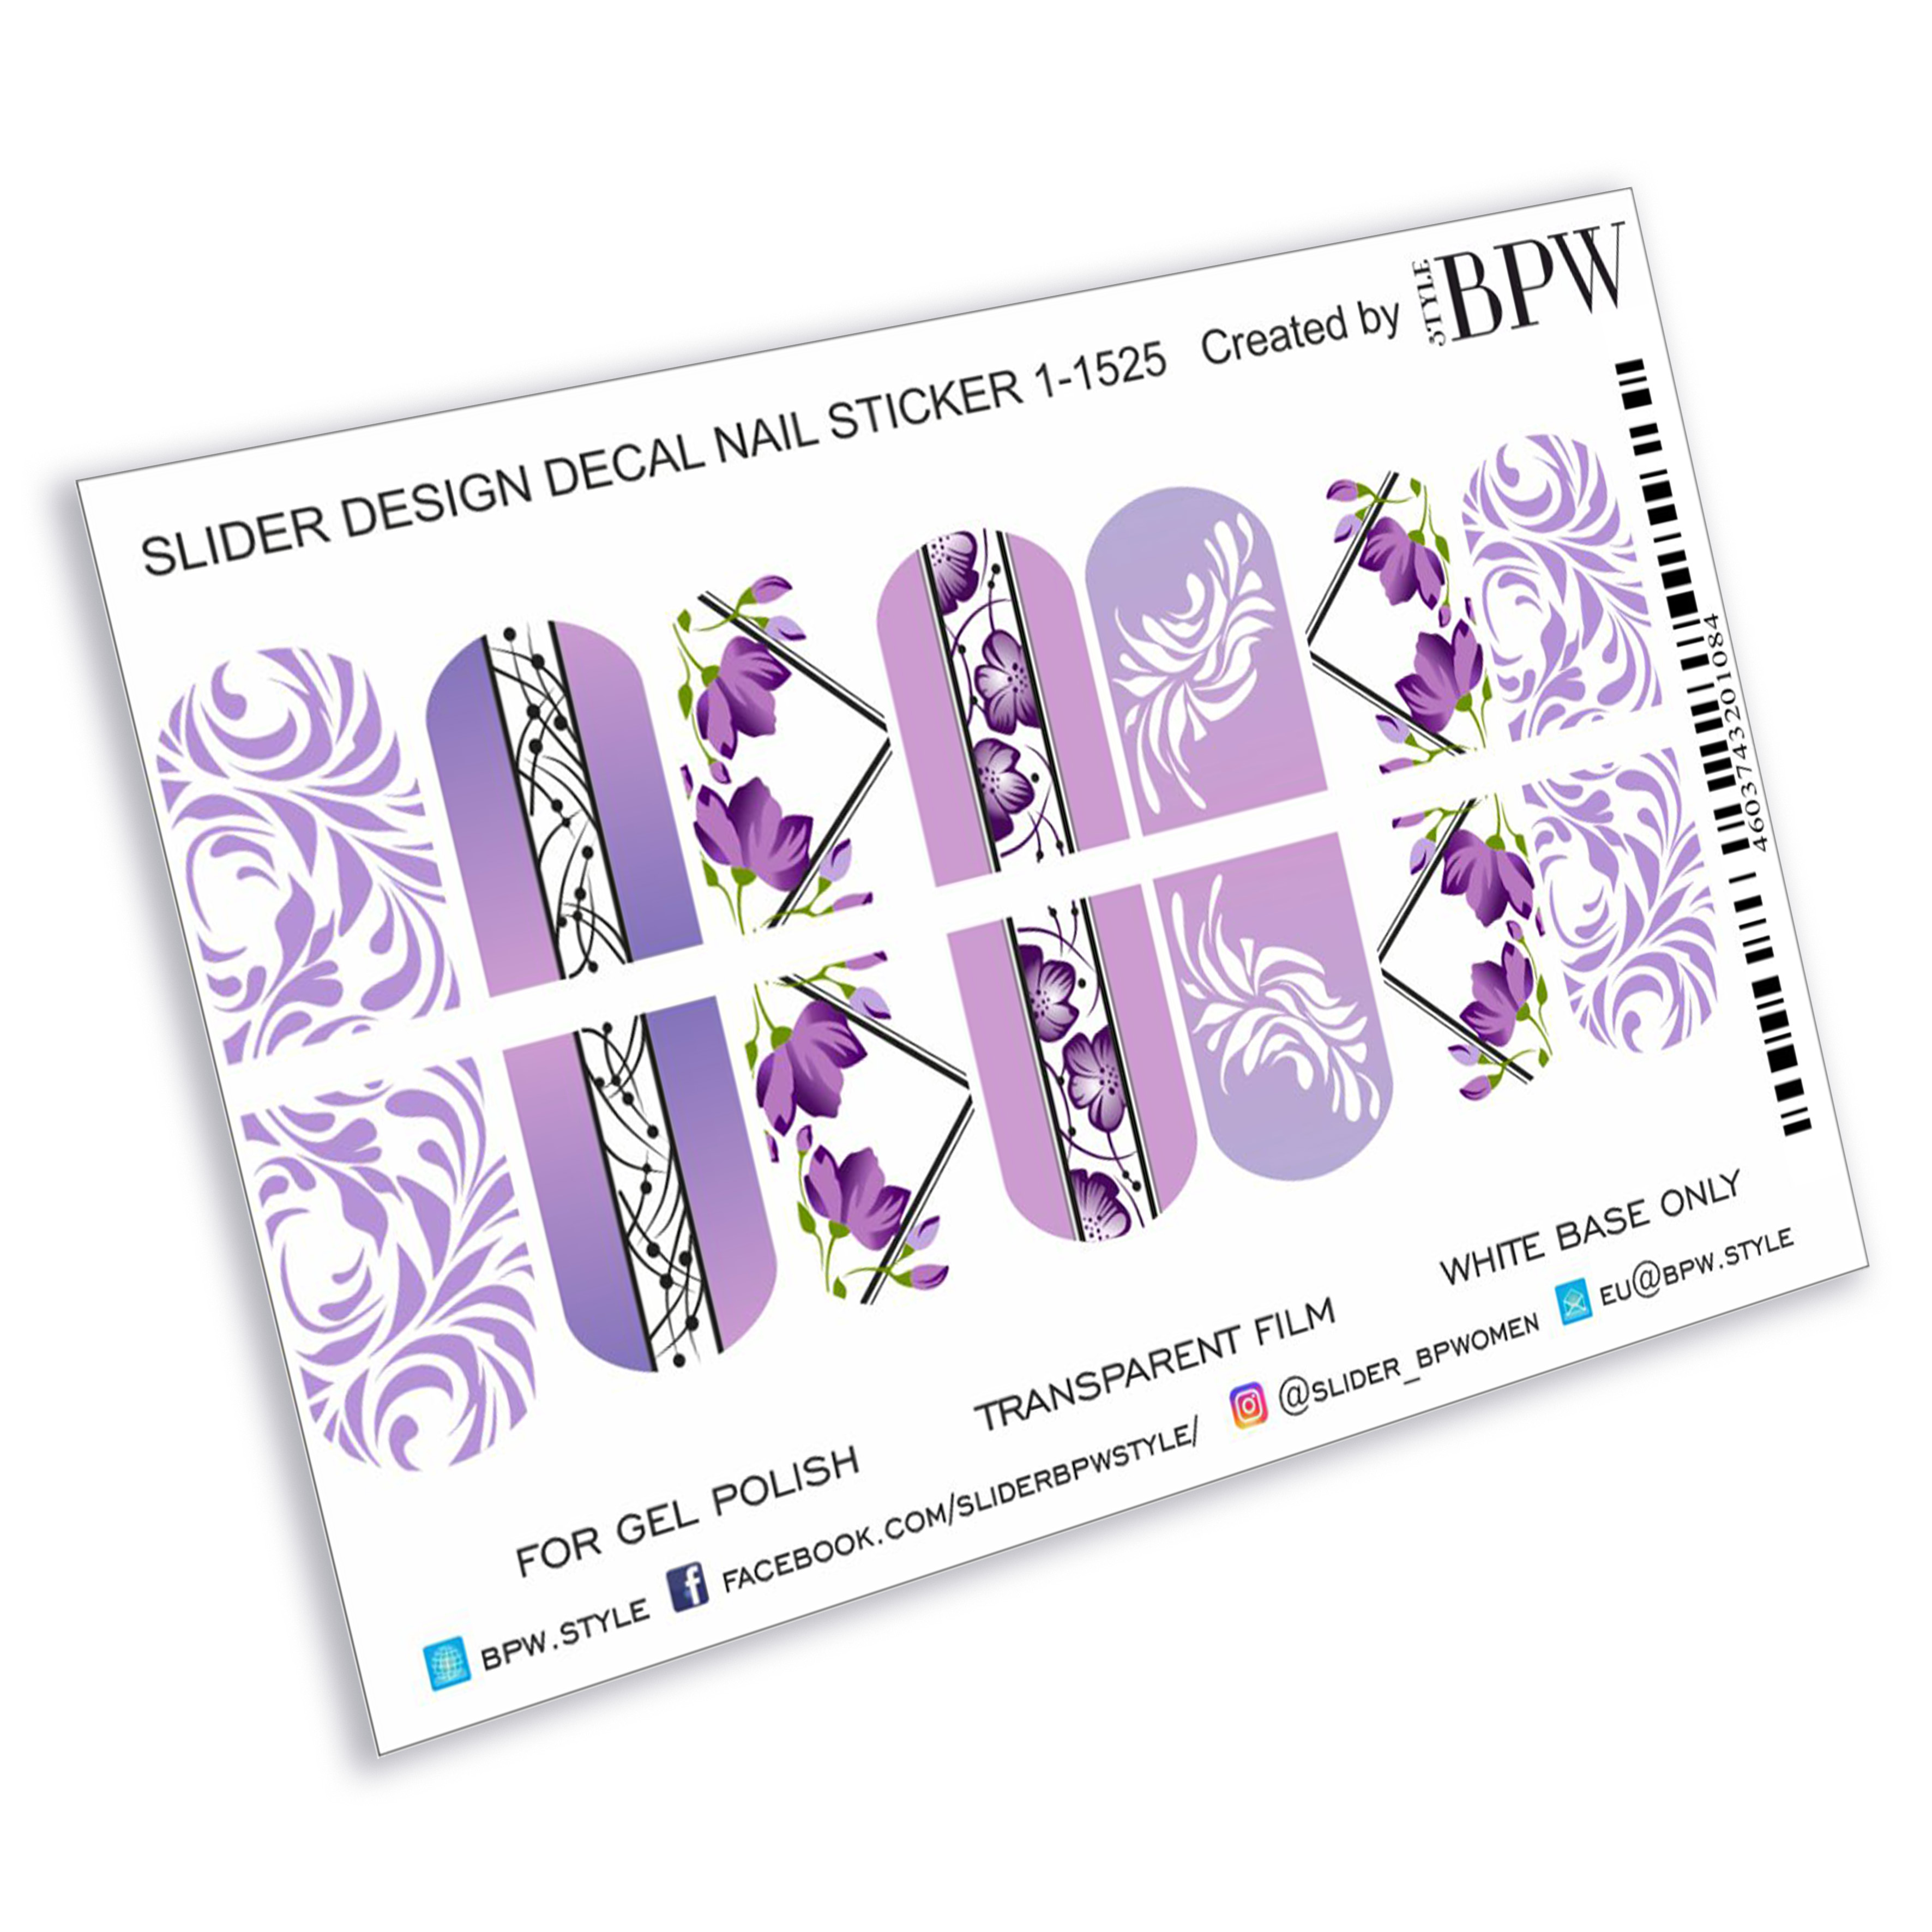 Decal nail sticker Violet pattern